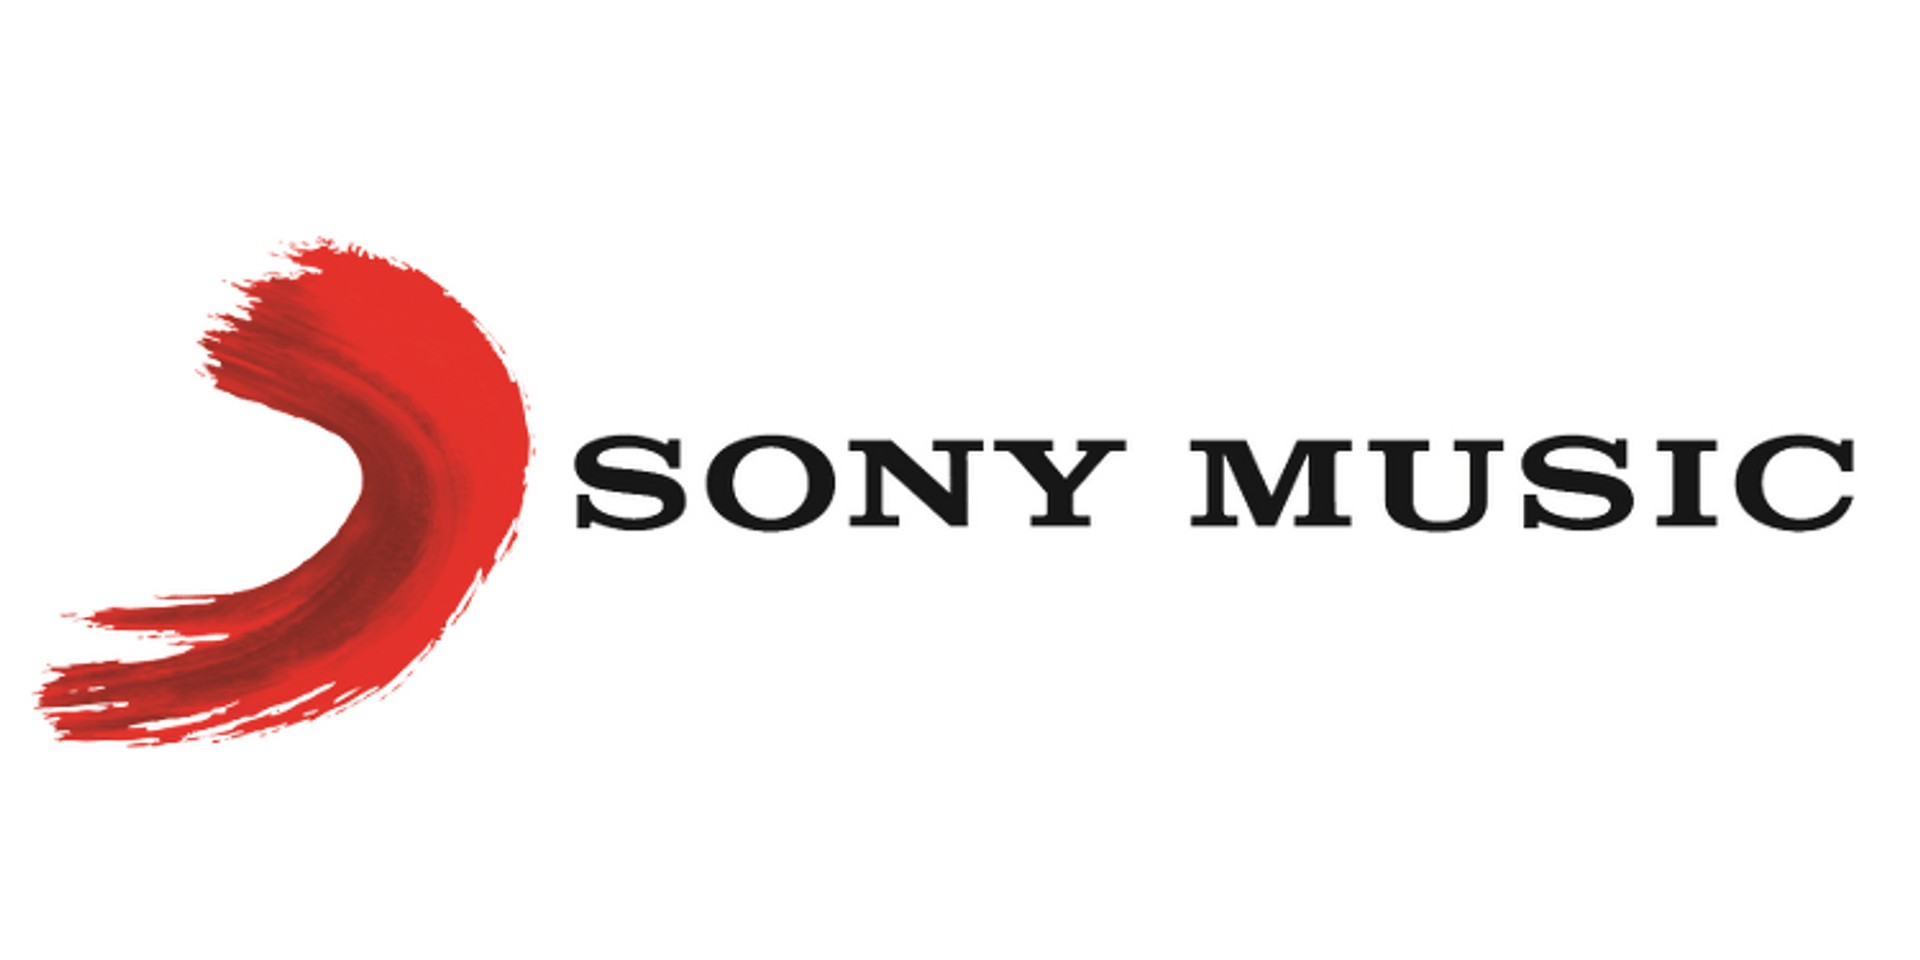 The remixing landscape is about to change, starting with Sony